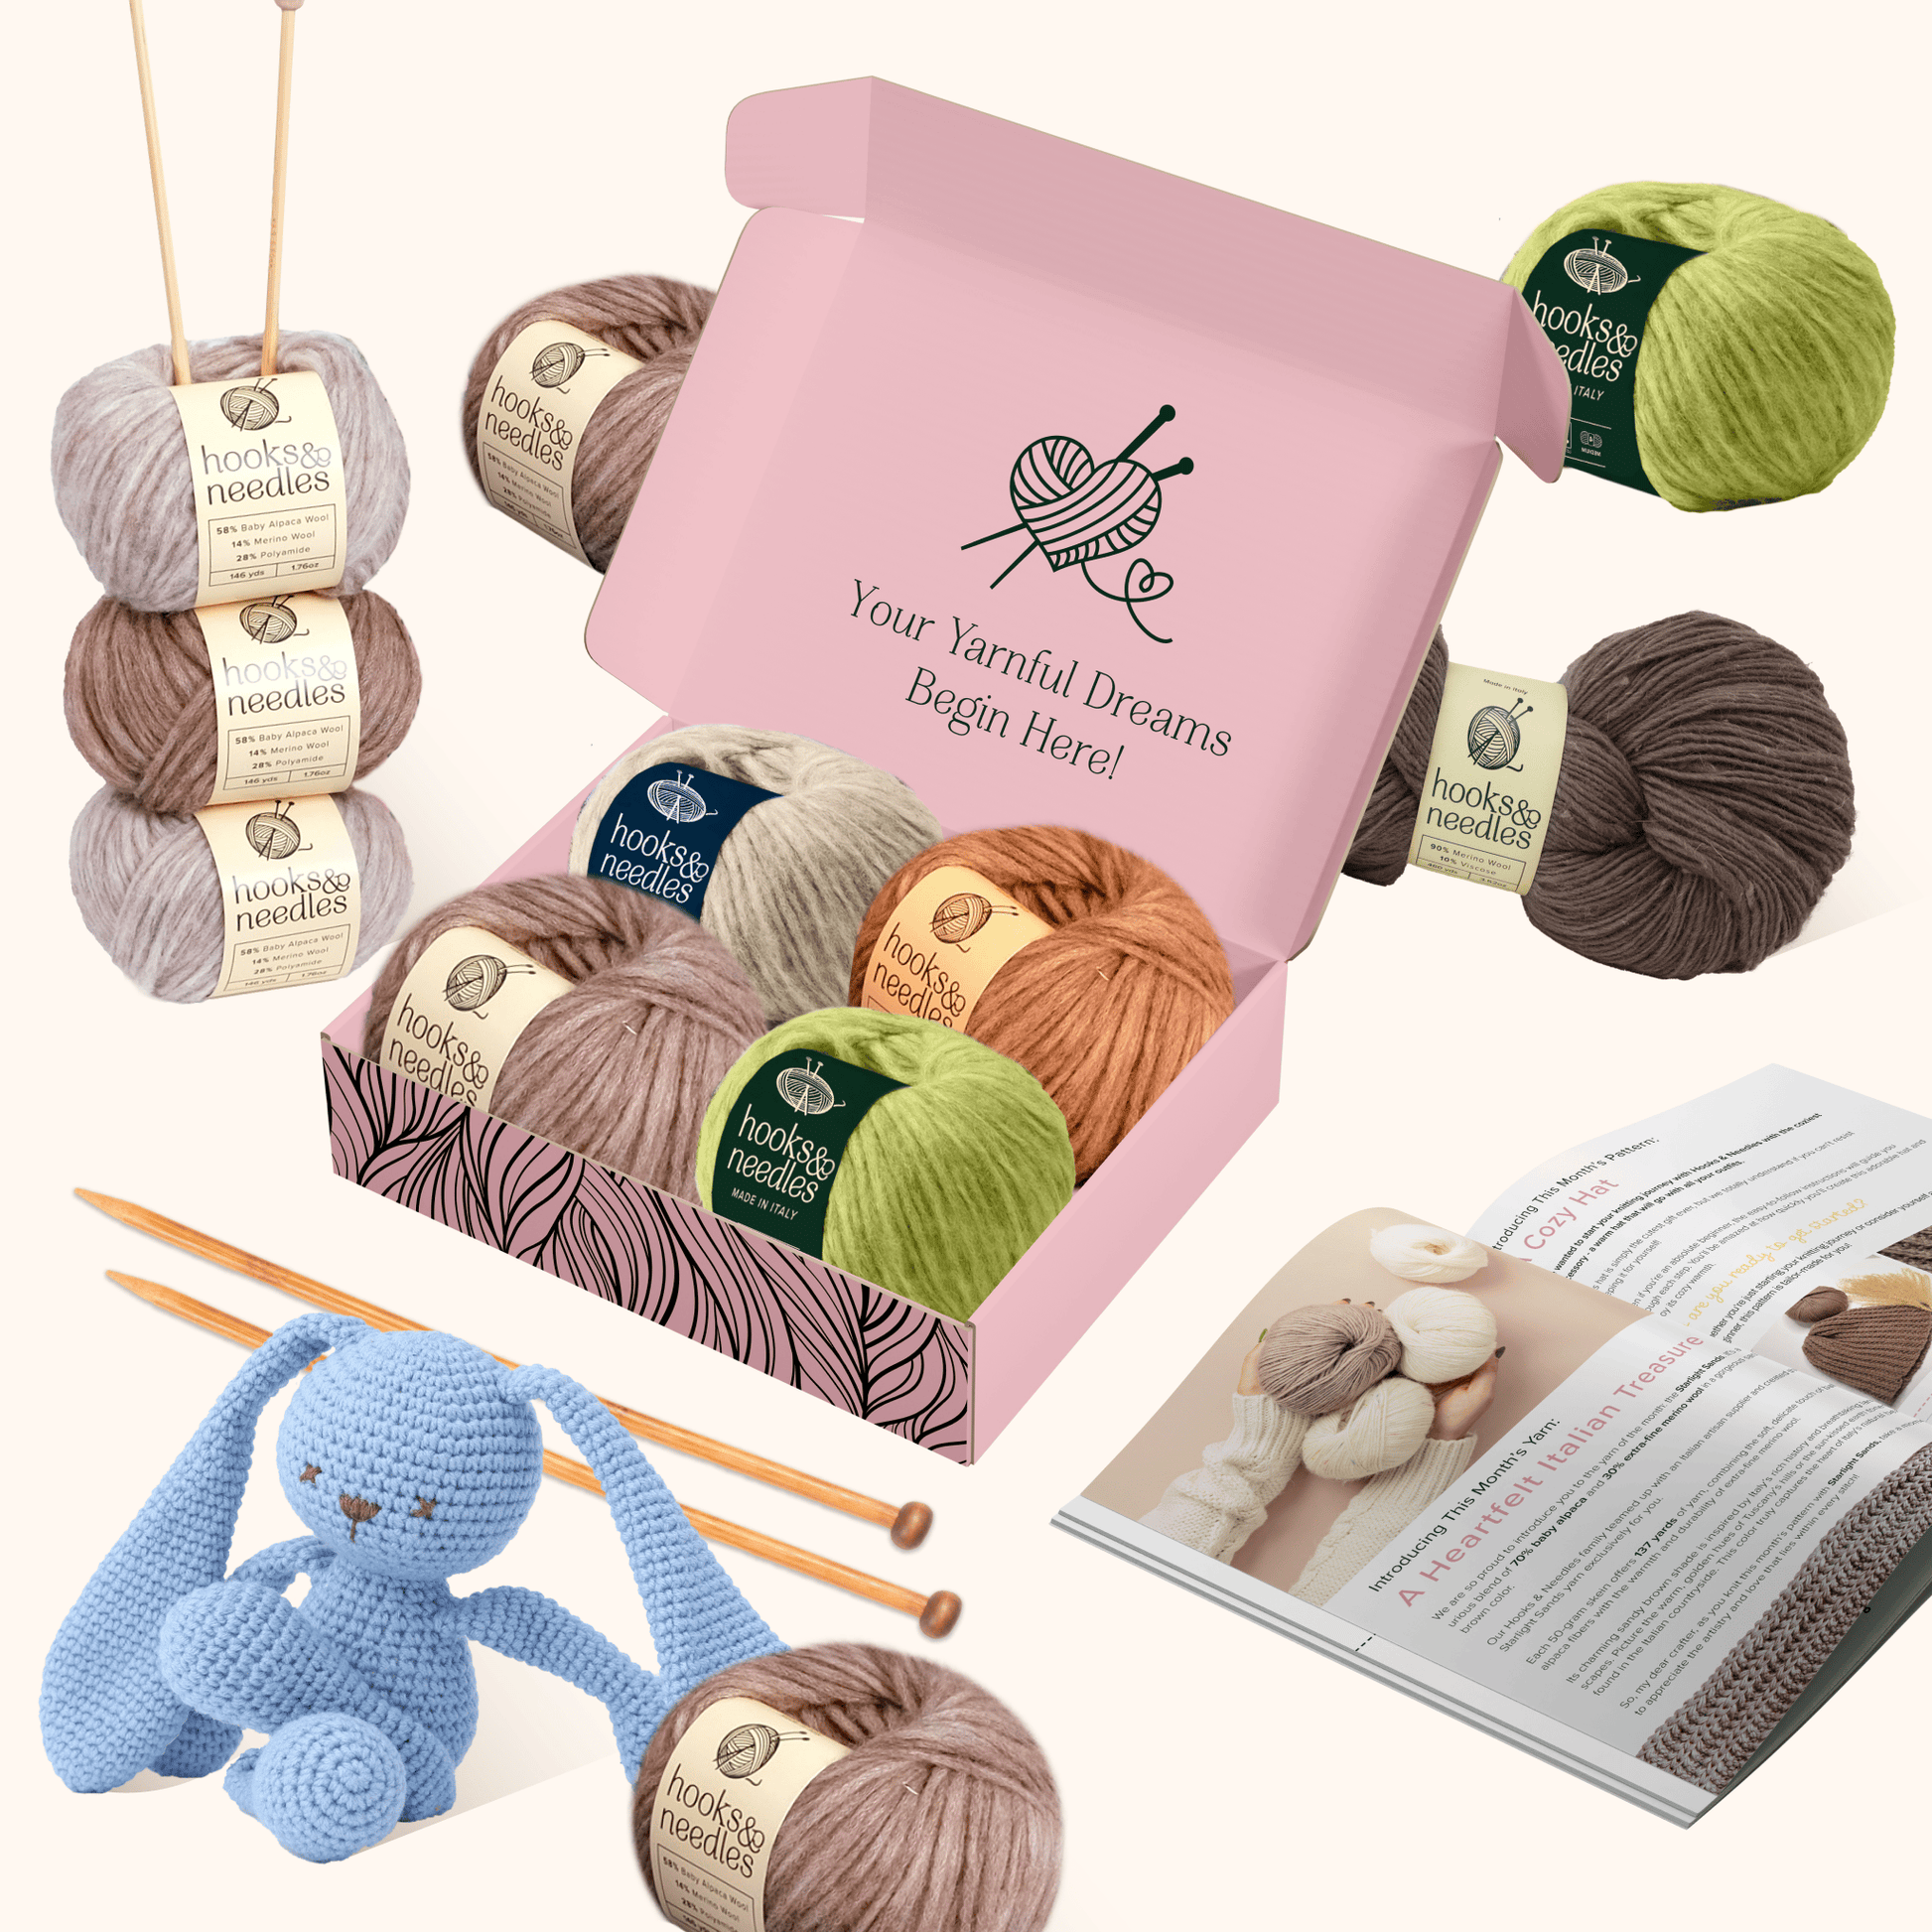 Inside Hooks & Needles subscription box you can find 2-4 yarns, tool set and a magazine with instructions.